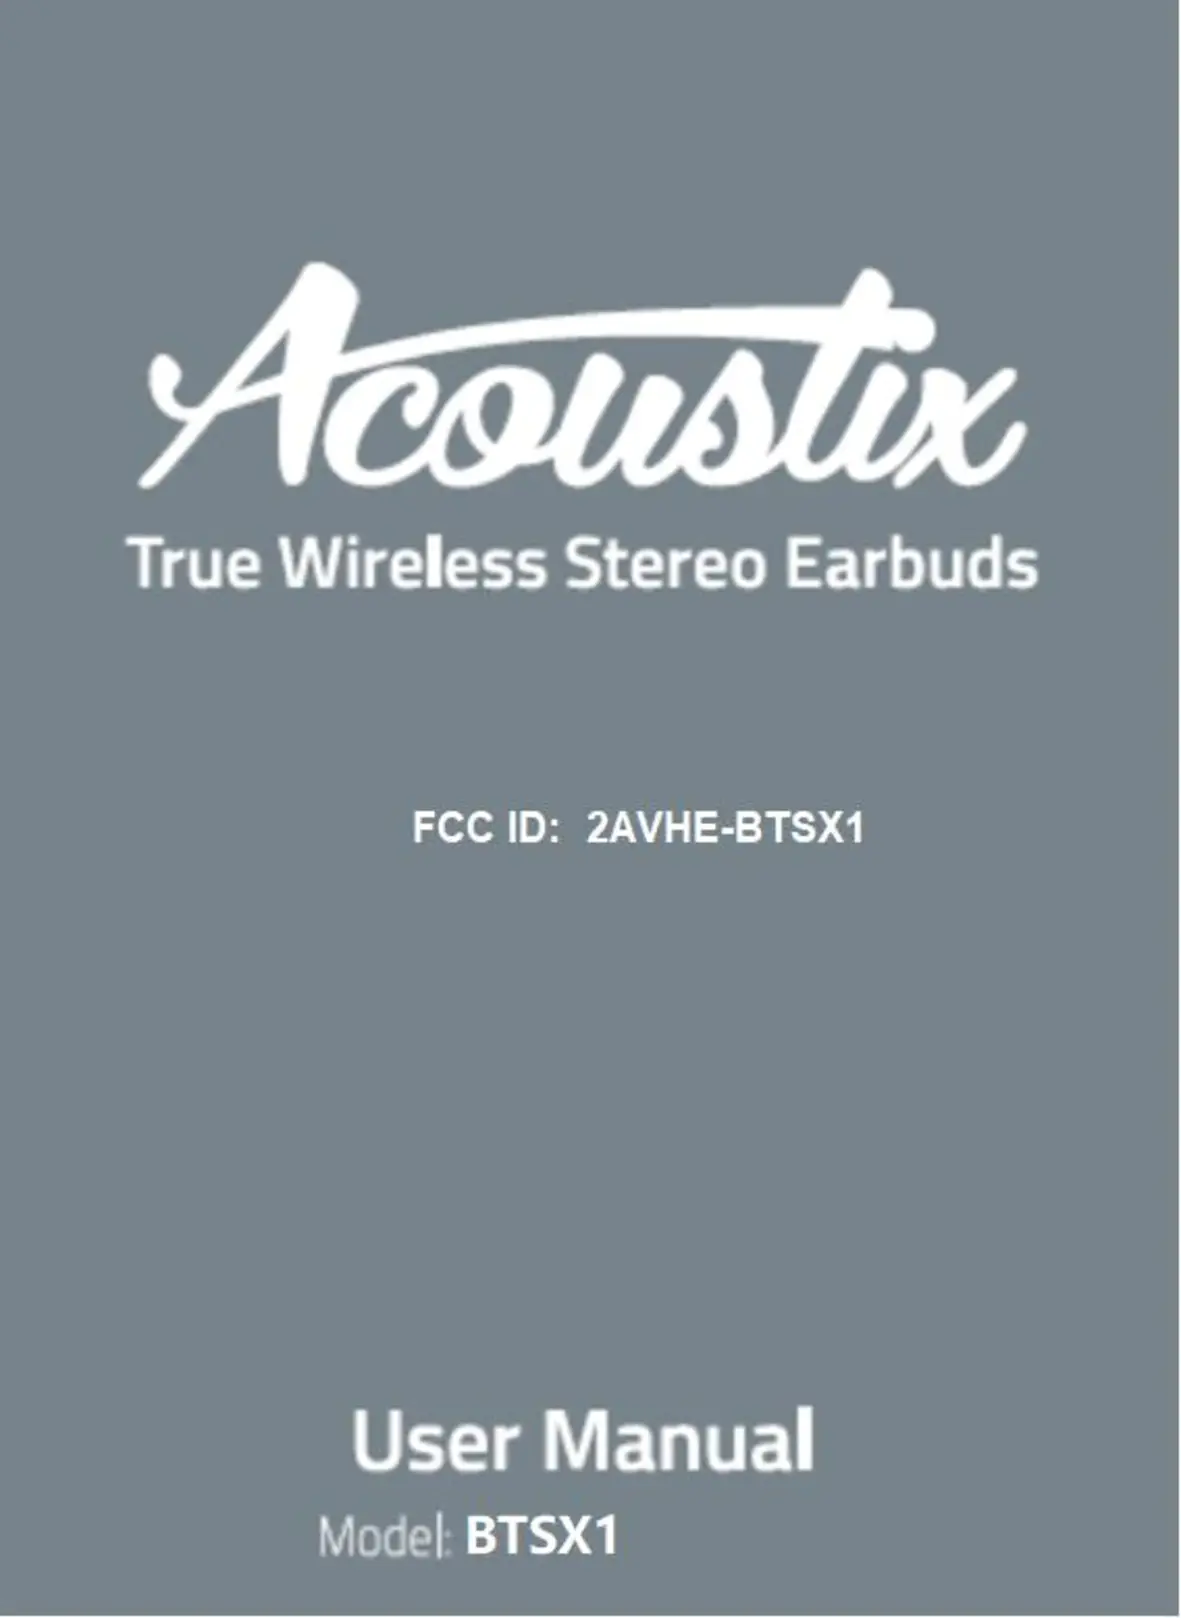 how to pair acoustix wireless earbuds